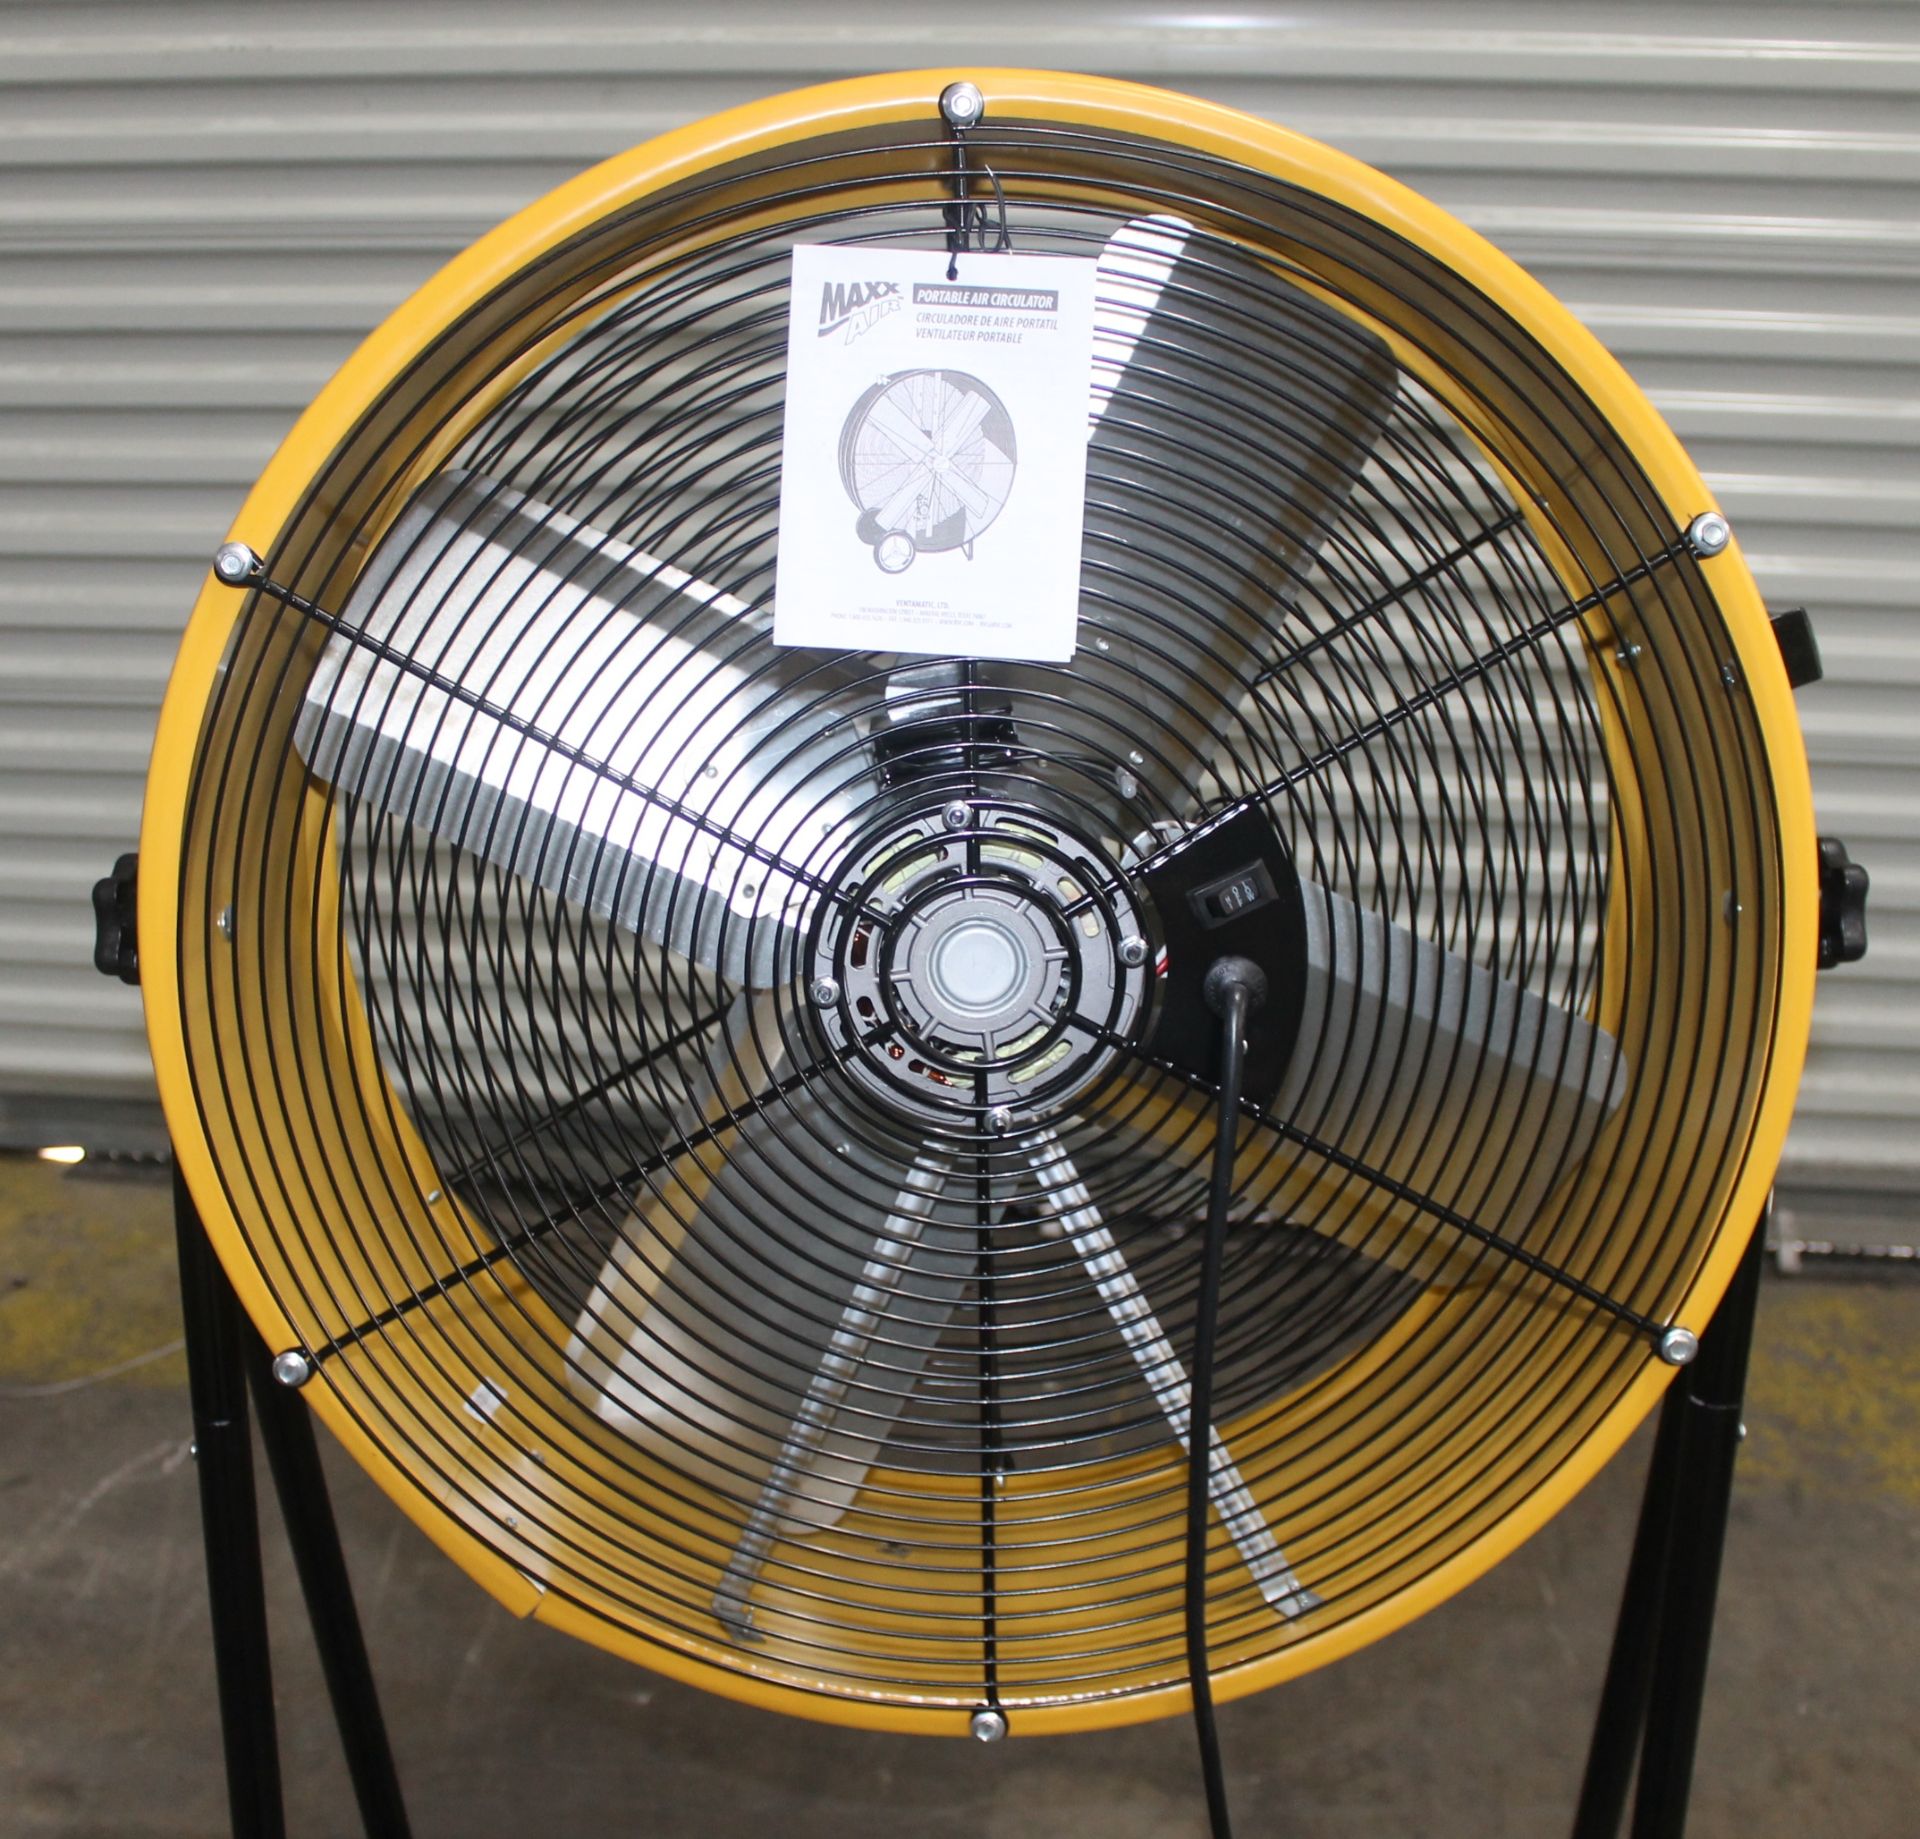 MAX AIR 24" 2 IN 1 TILT FAN,  MODEL: BF24TF2N1, CONVERTS FROM A ROLL AROUND FLOOR FAN TO A 52" STAND - Image 3 of 3